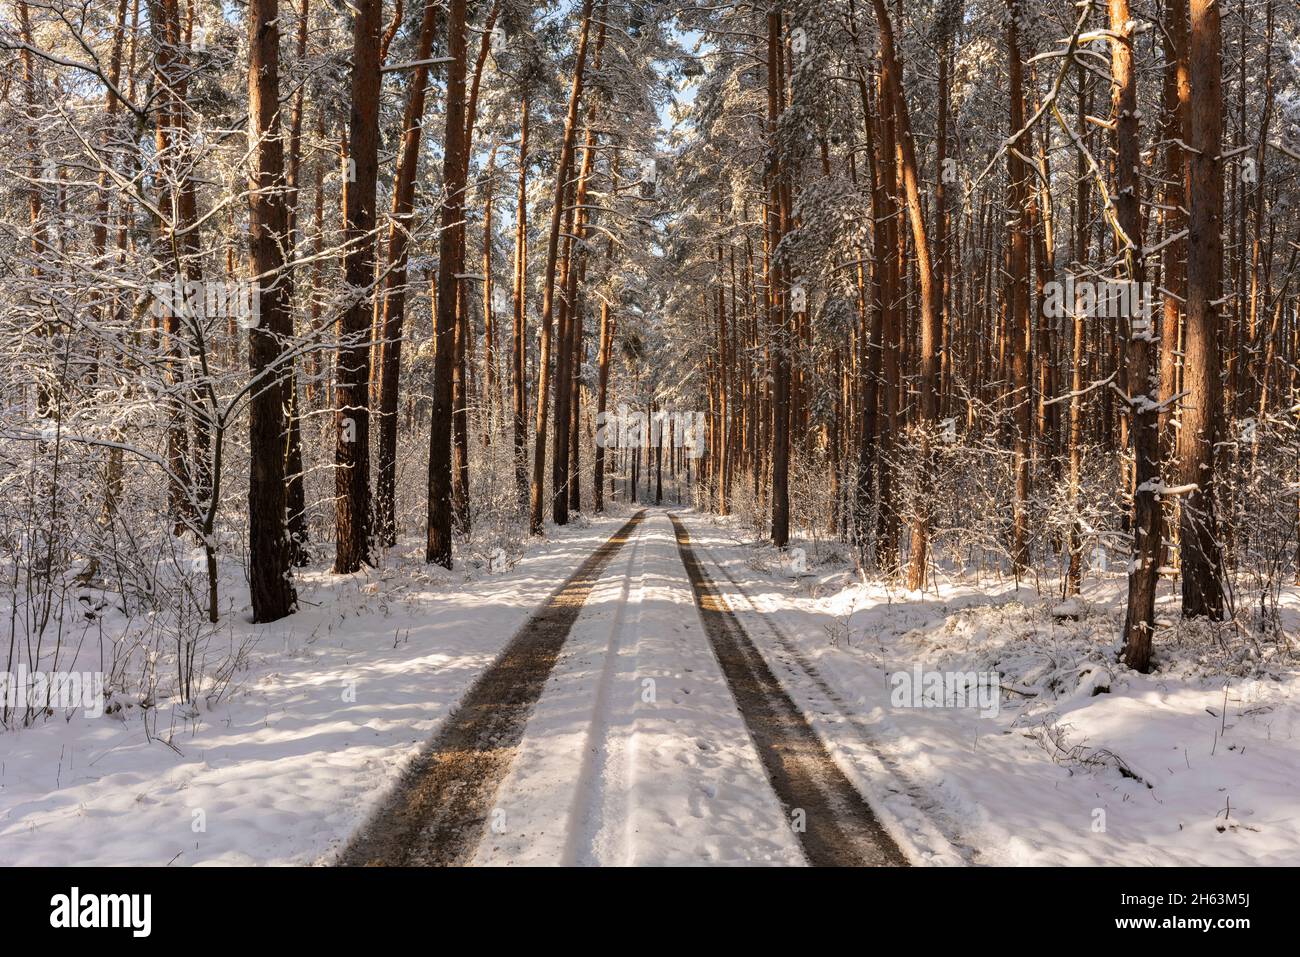 snowy forest road in winter,snow-covered trees,winter landscape,light and shadows Stock Photo